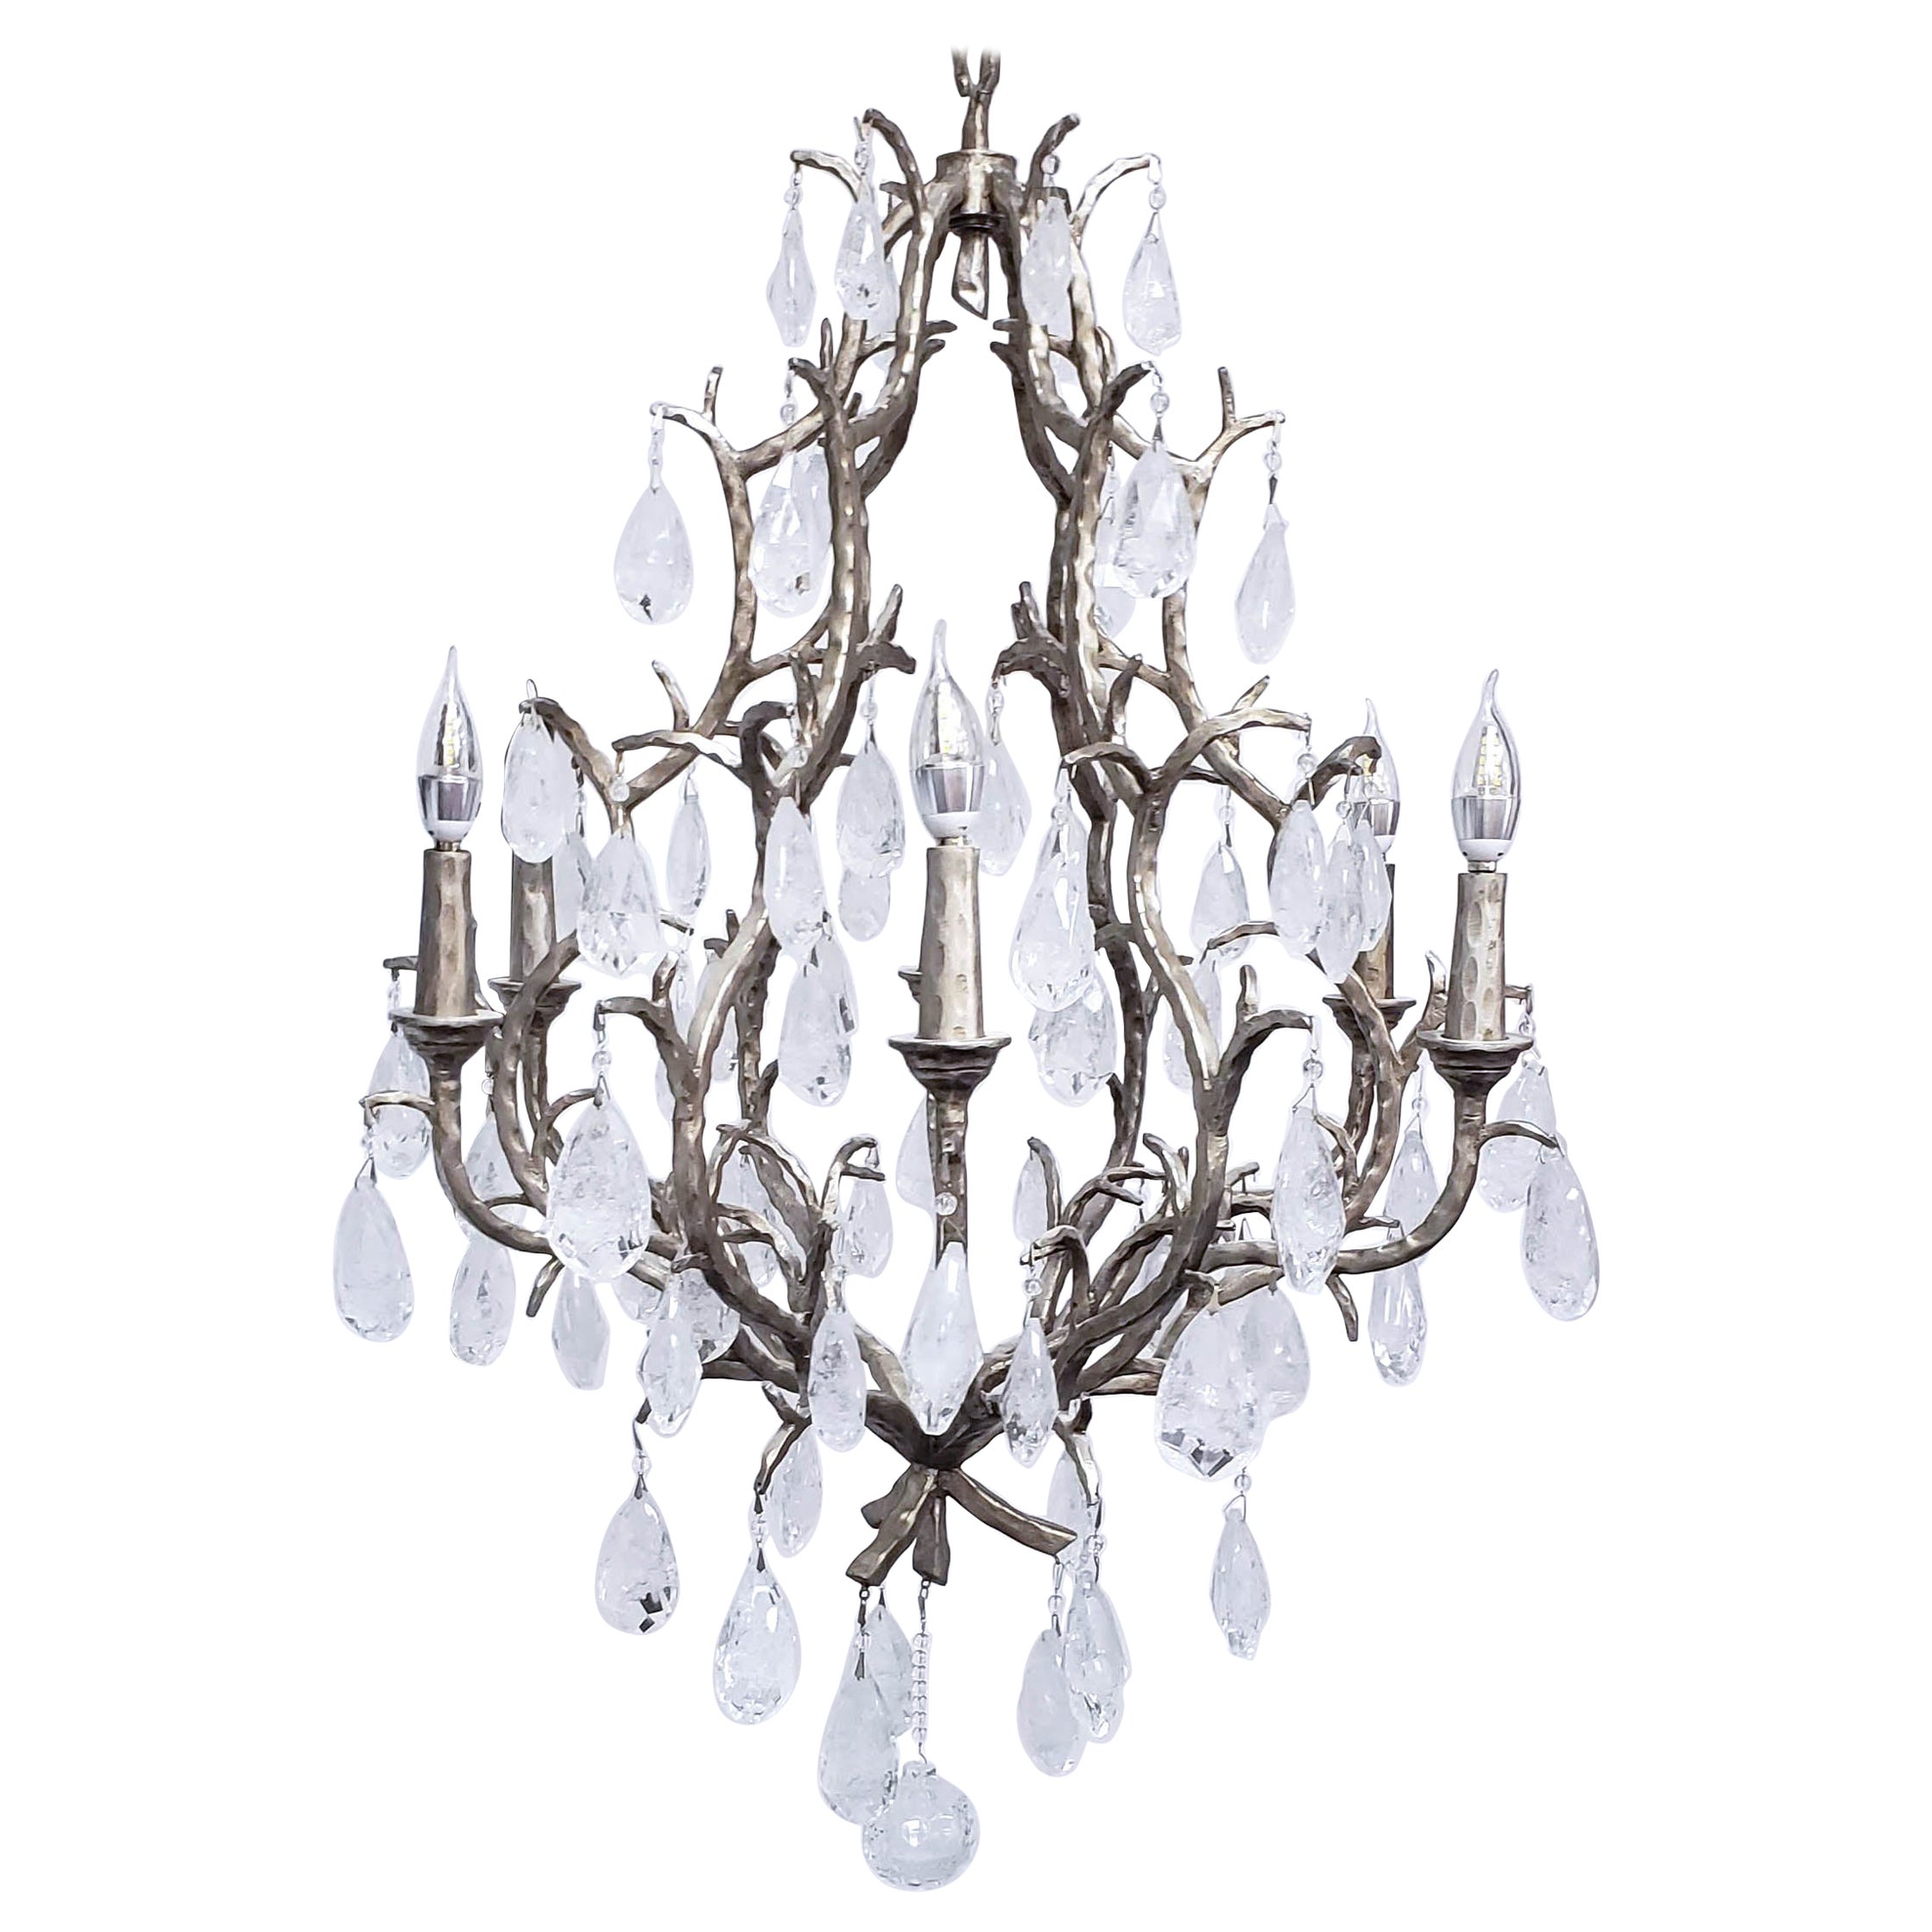 Rock Crystal 6 Arm Handcrafted Iron Twig Chandelier For Sale